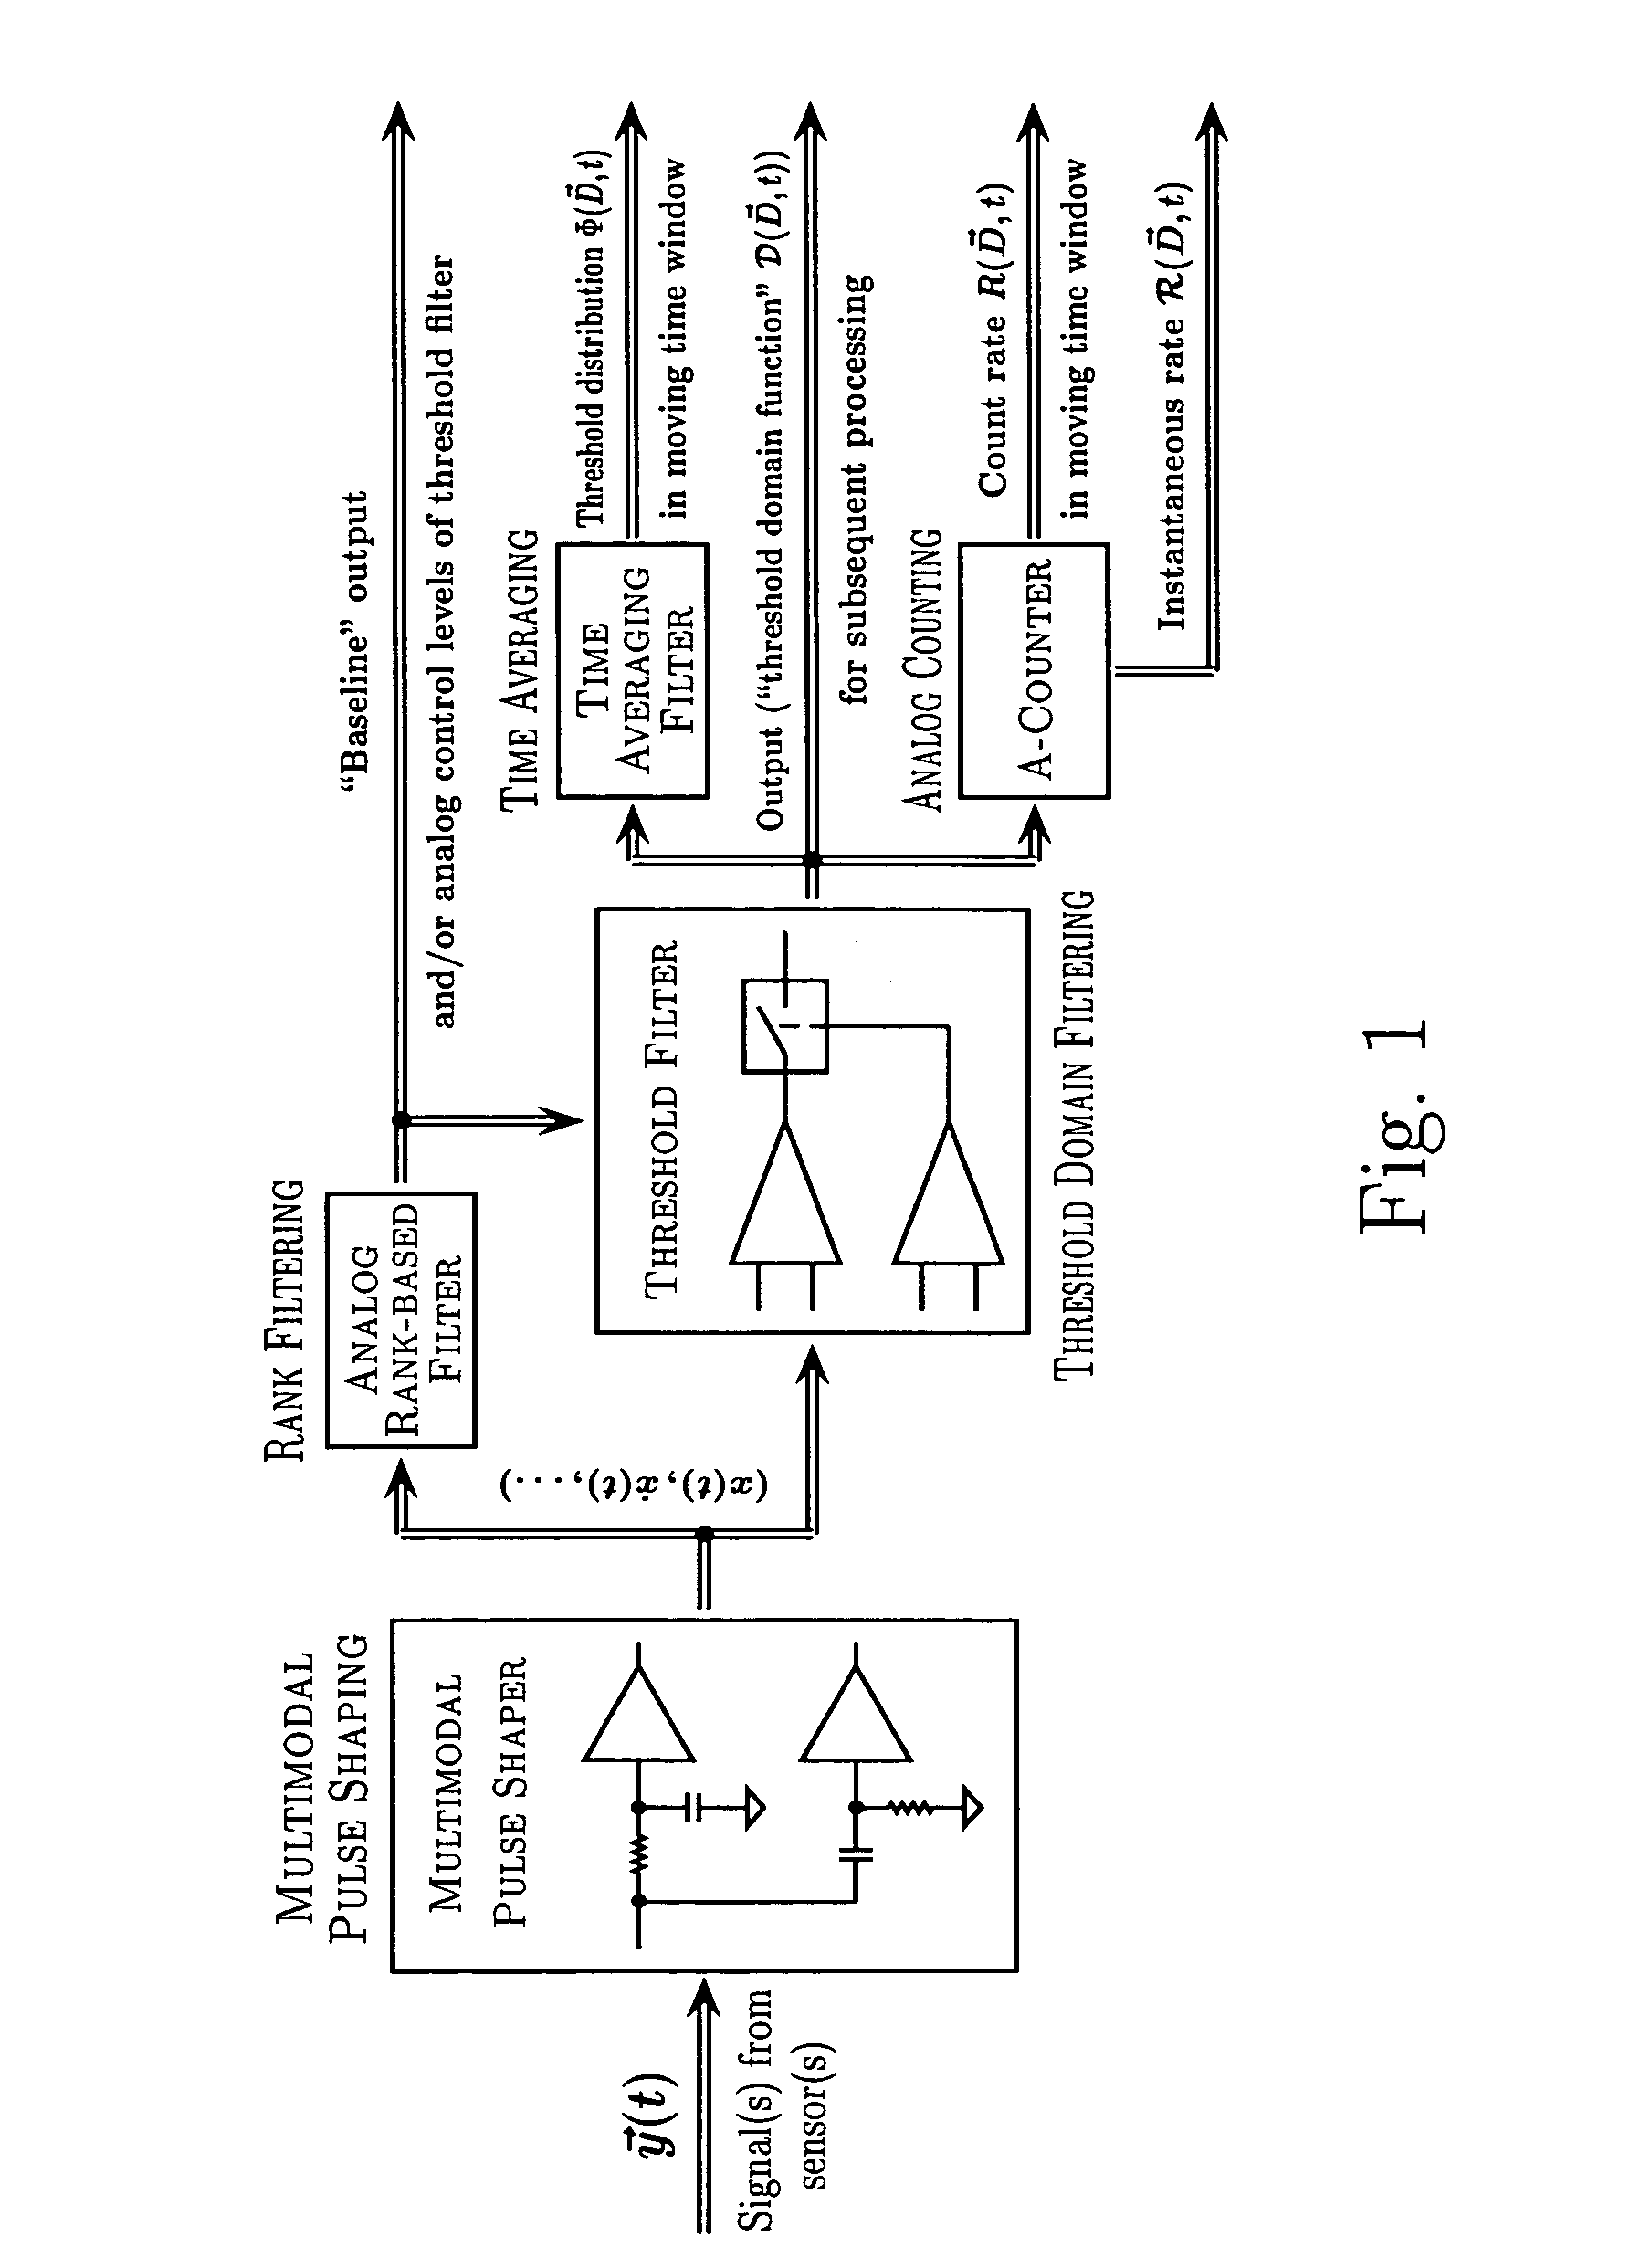 Method and apparatus for adaptive real-time signal conditioning, processing, analysis, quantification, comparison, and control